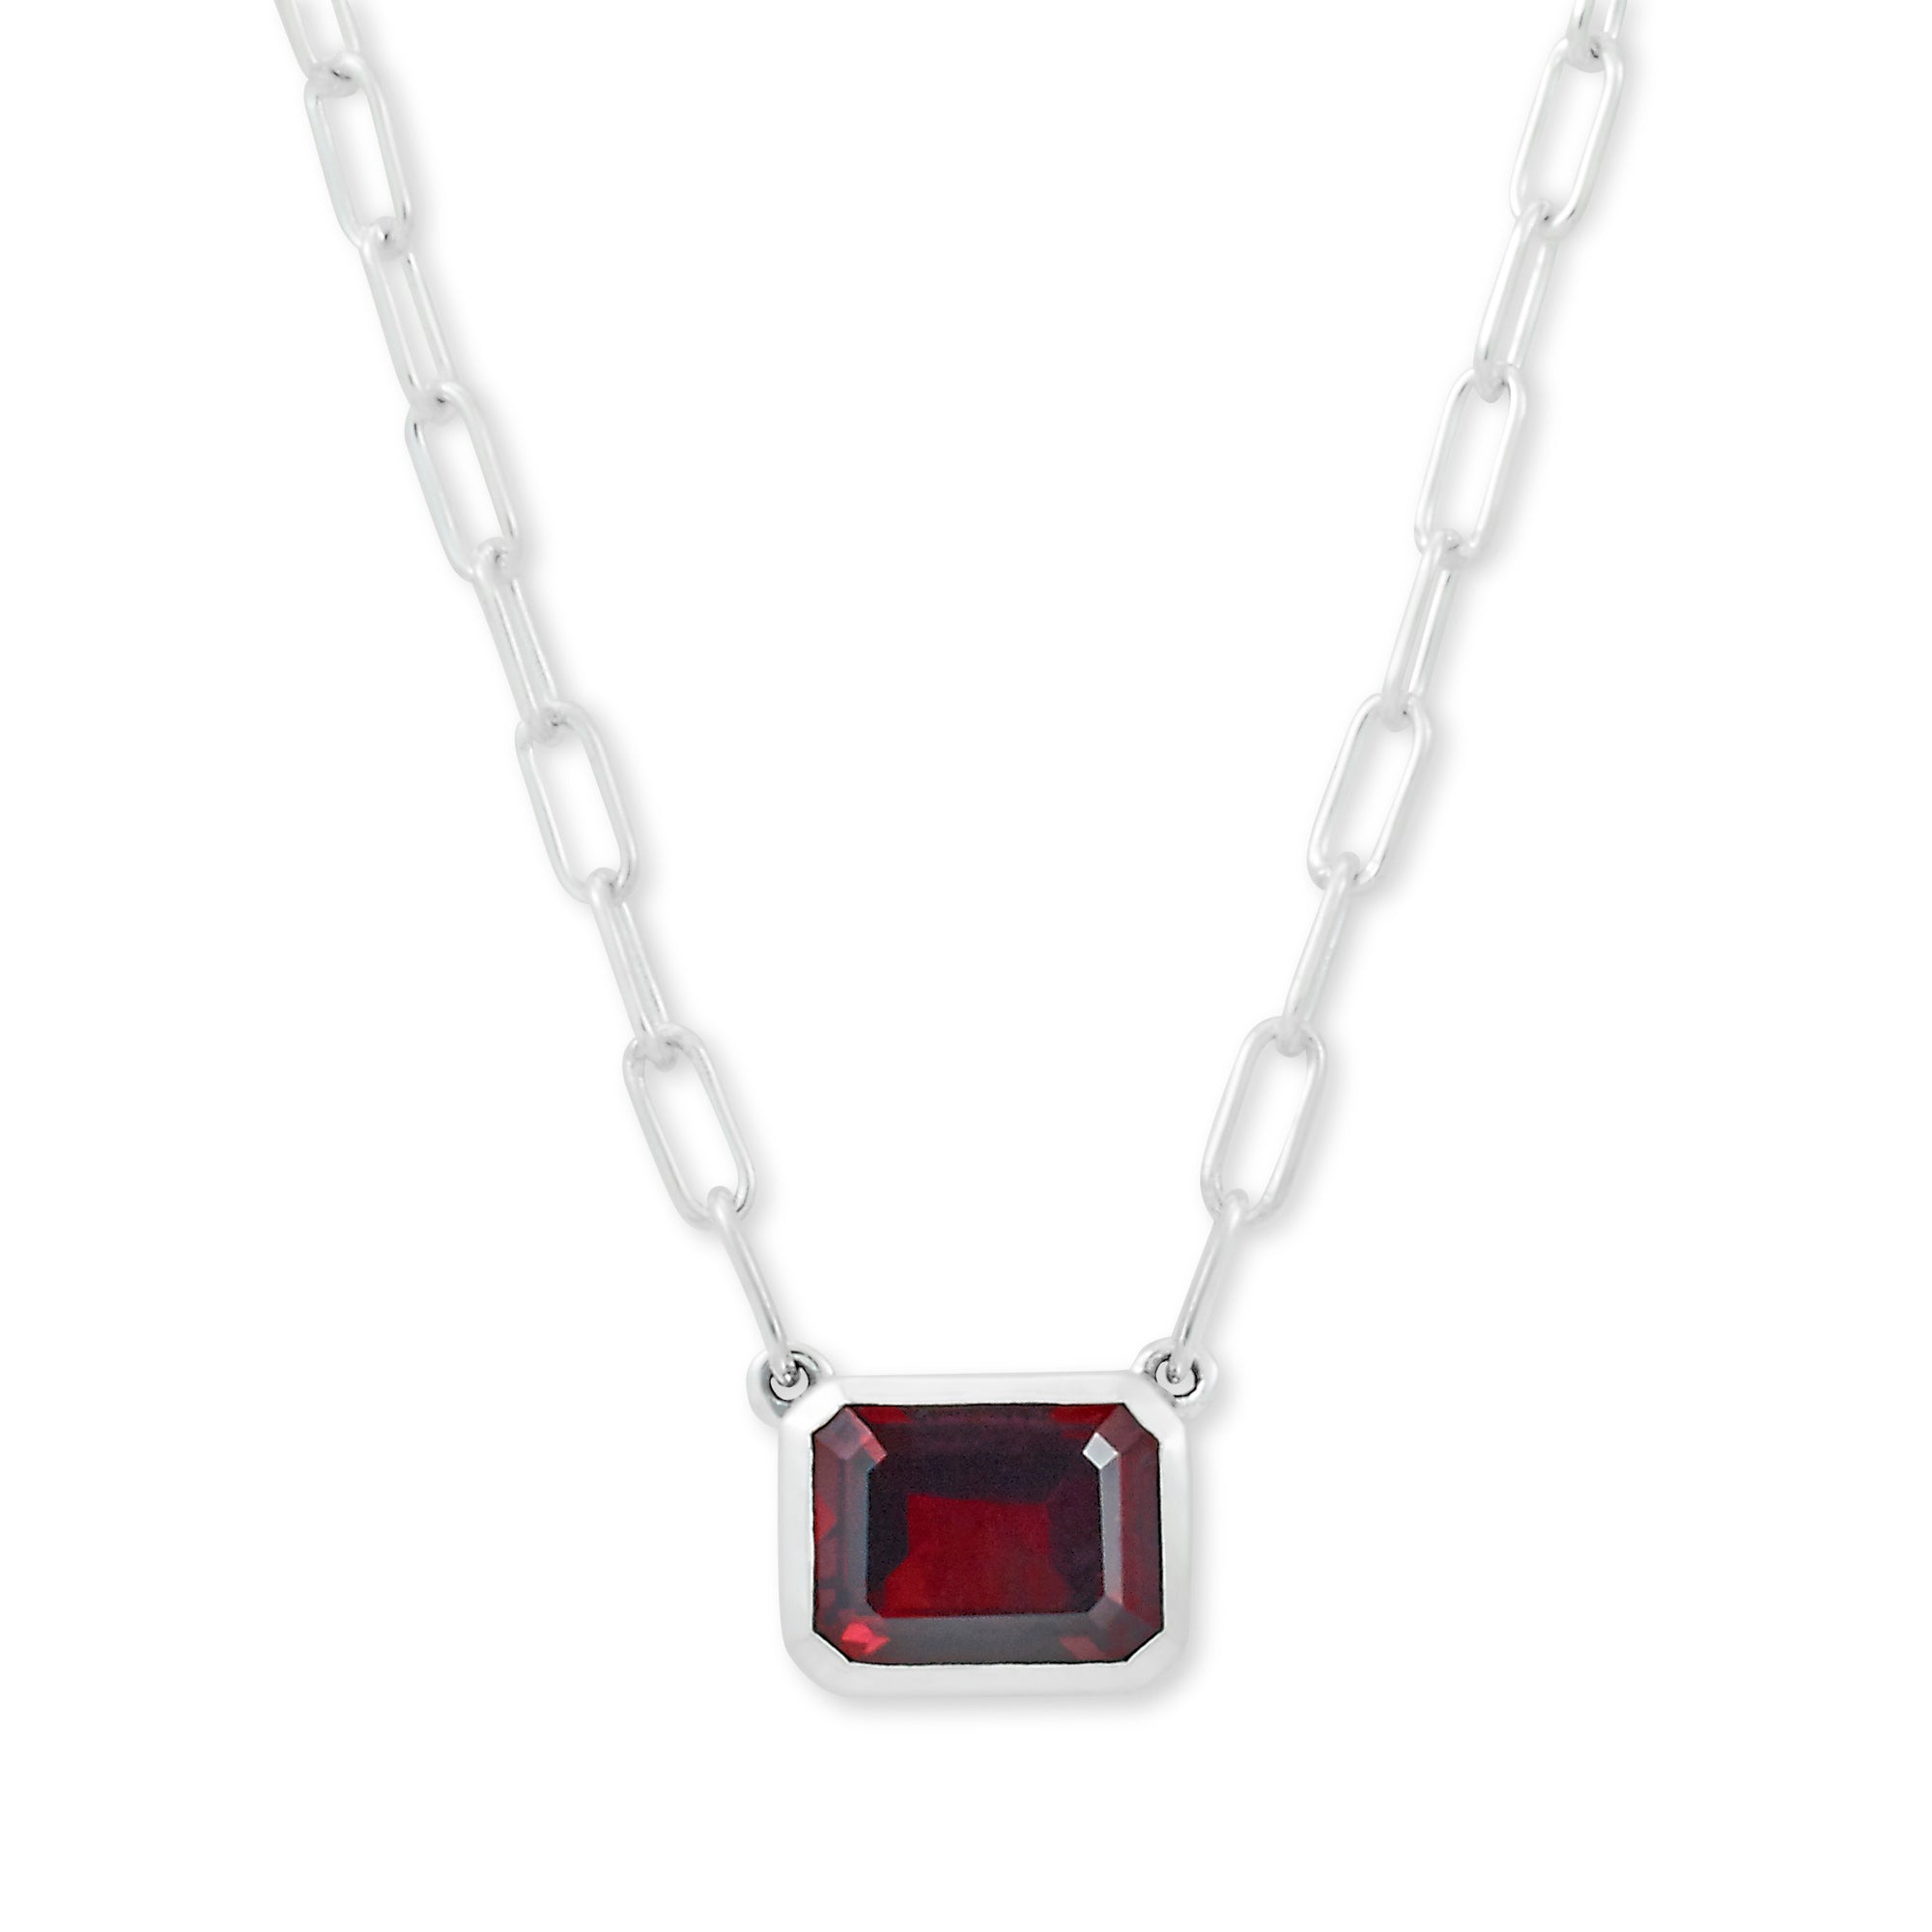 Garnet Eirini Necklace available at Talisman Collection Fine Jewelers in El Dorado Hills, CA and online. Specs: Garnet Eirini Necklace features an emerald-cut garnet solitaire measuring 7x9mm, and is set in Sterling Silver. 